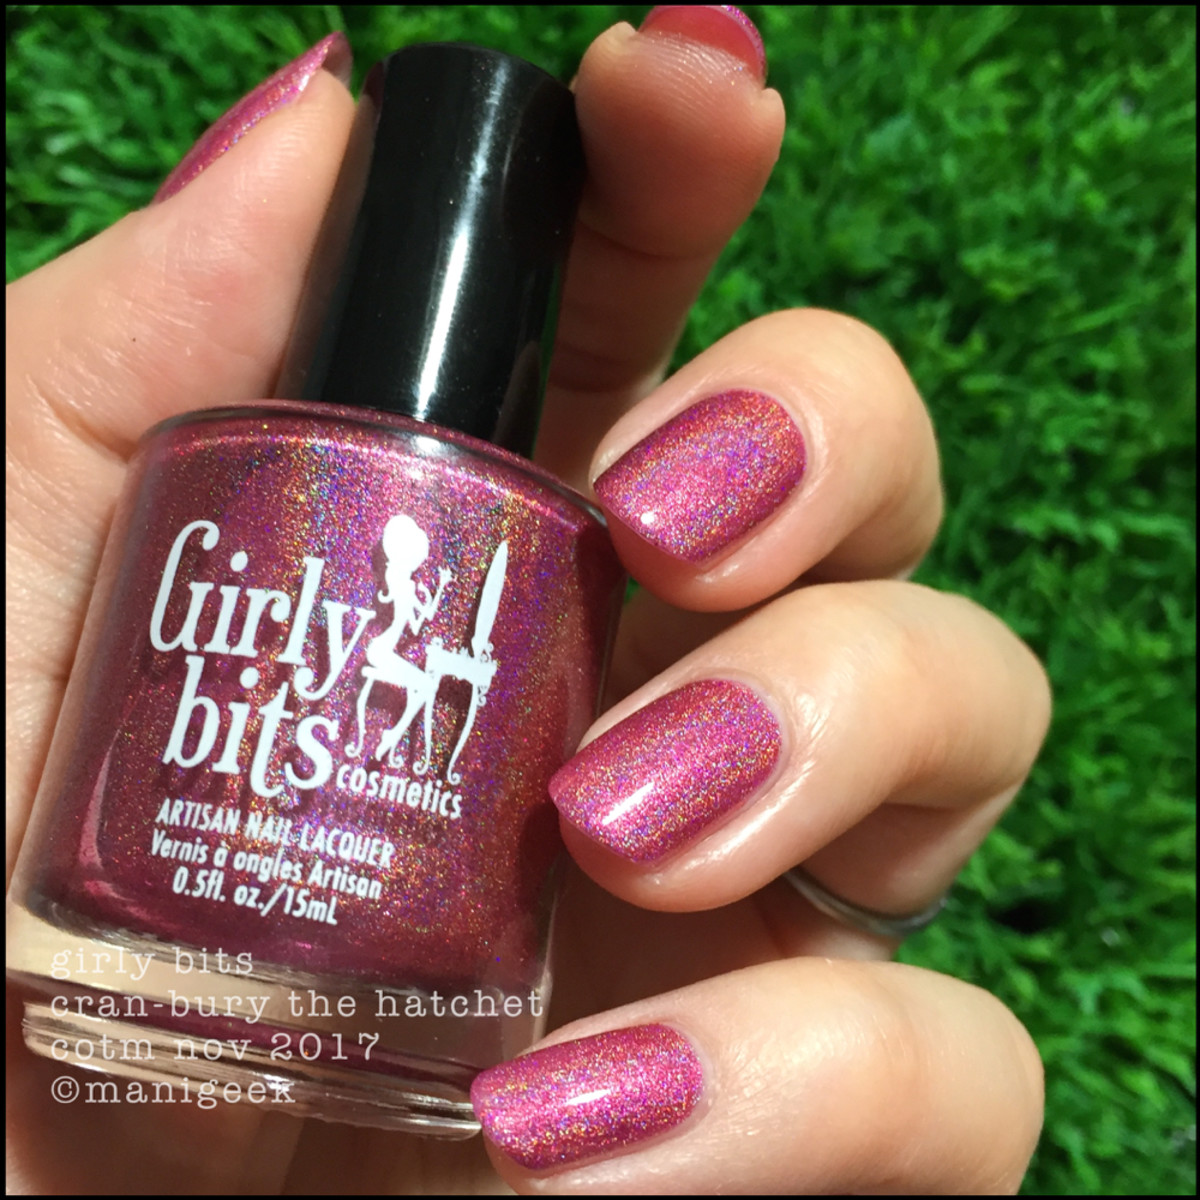 Girly Bits Cran-bury The Hatchet COTM 2 _ Girly Bits LE Colour of the Month Nov 2017